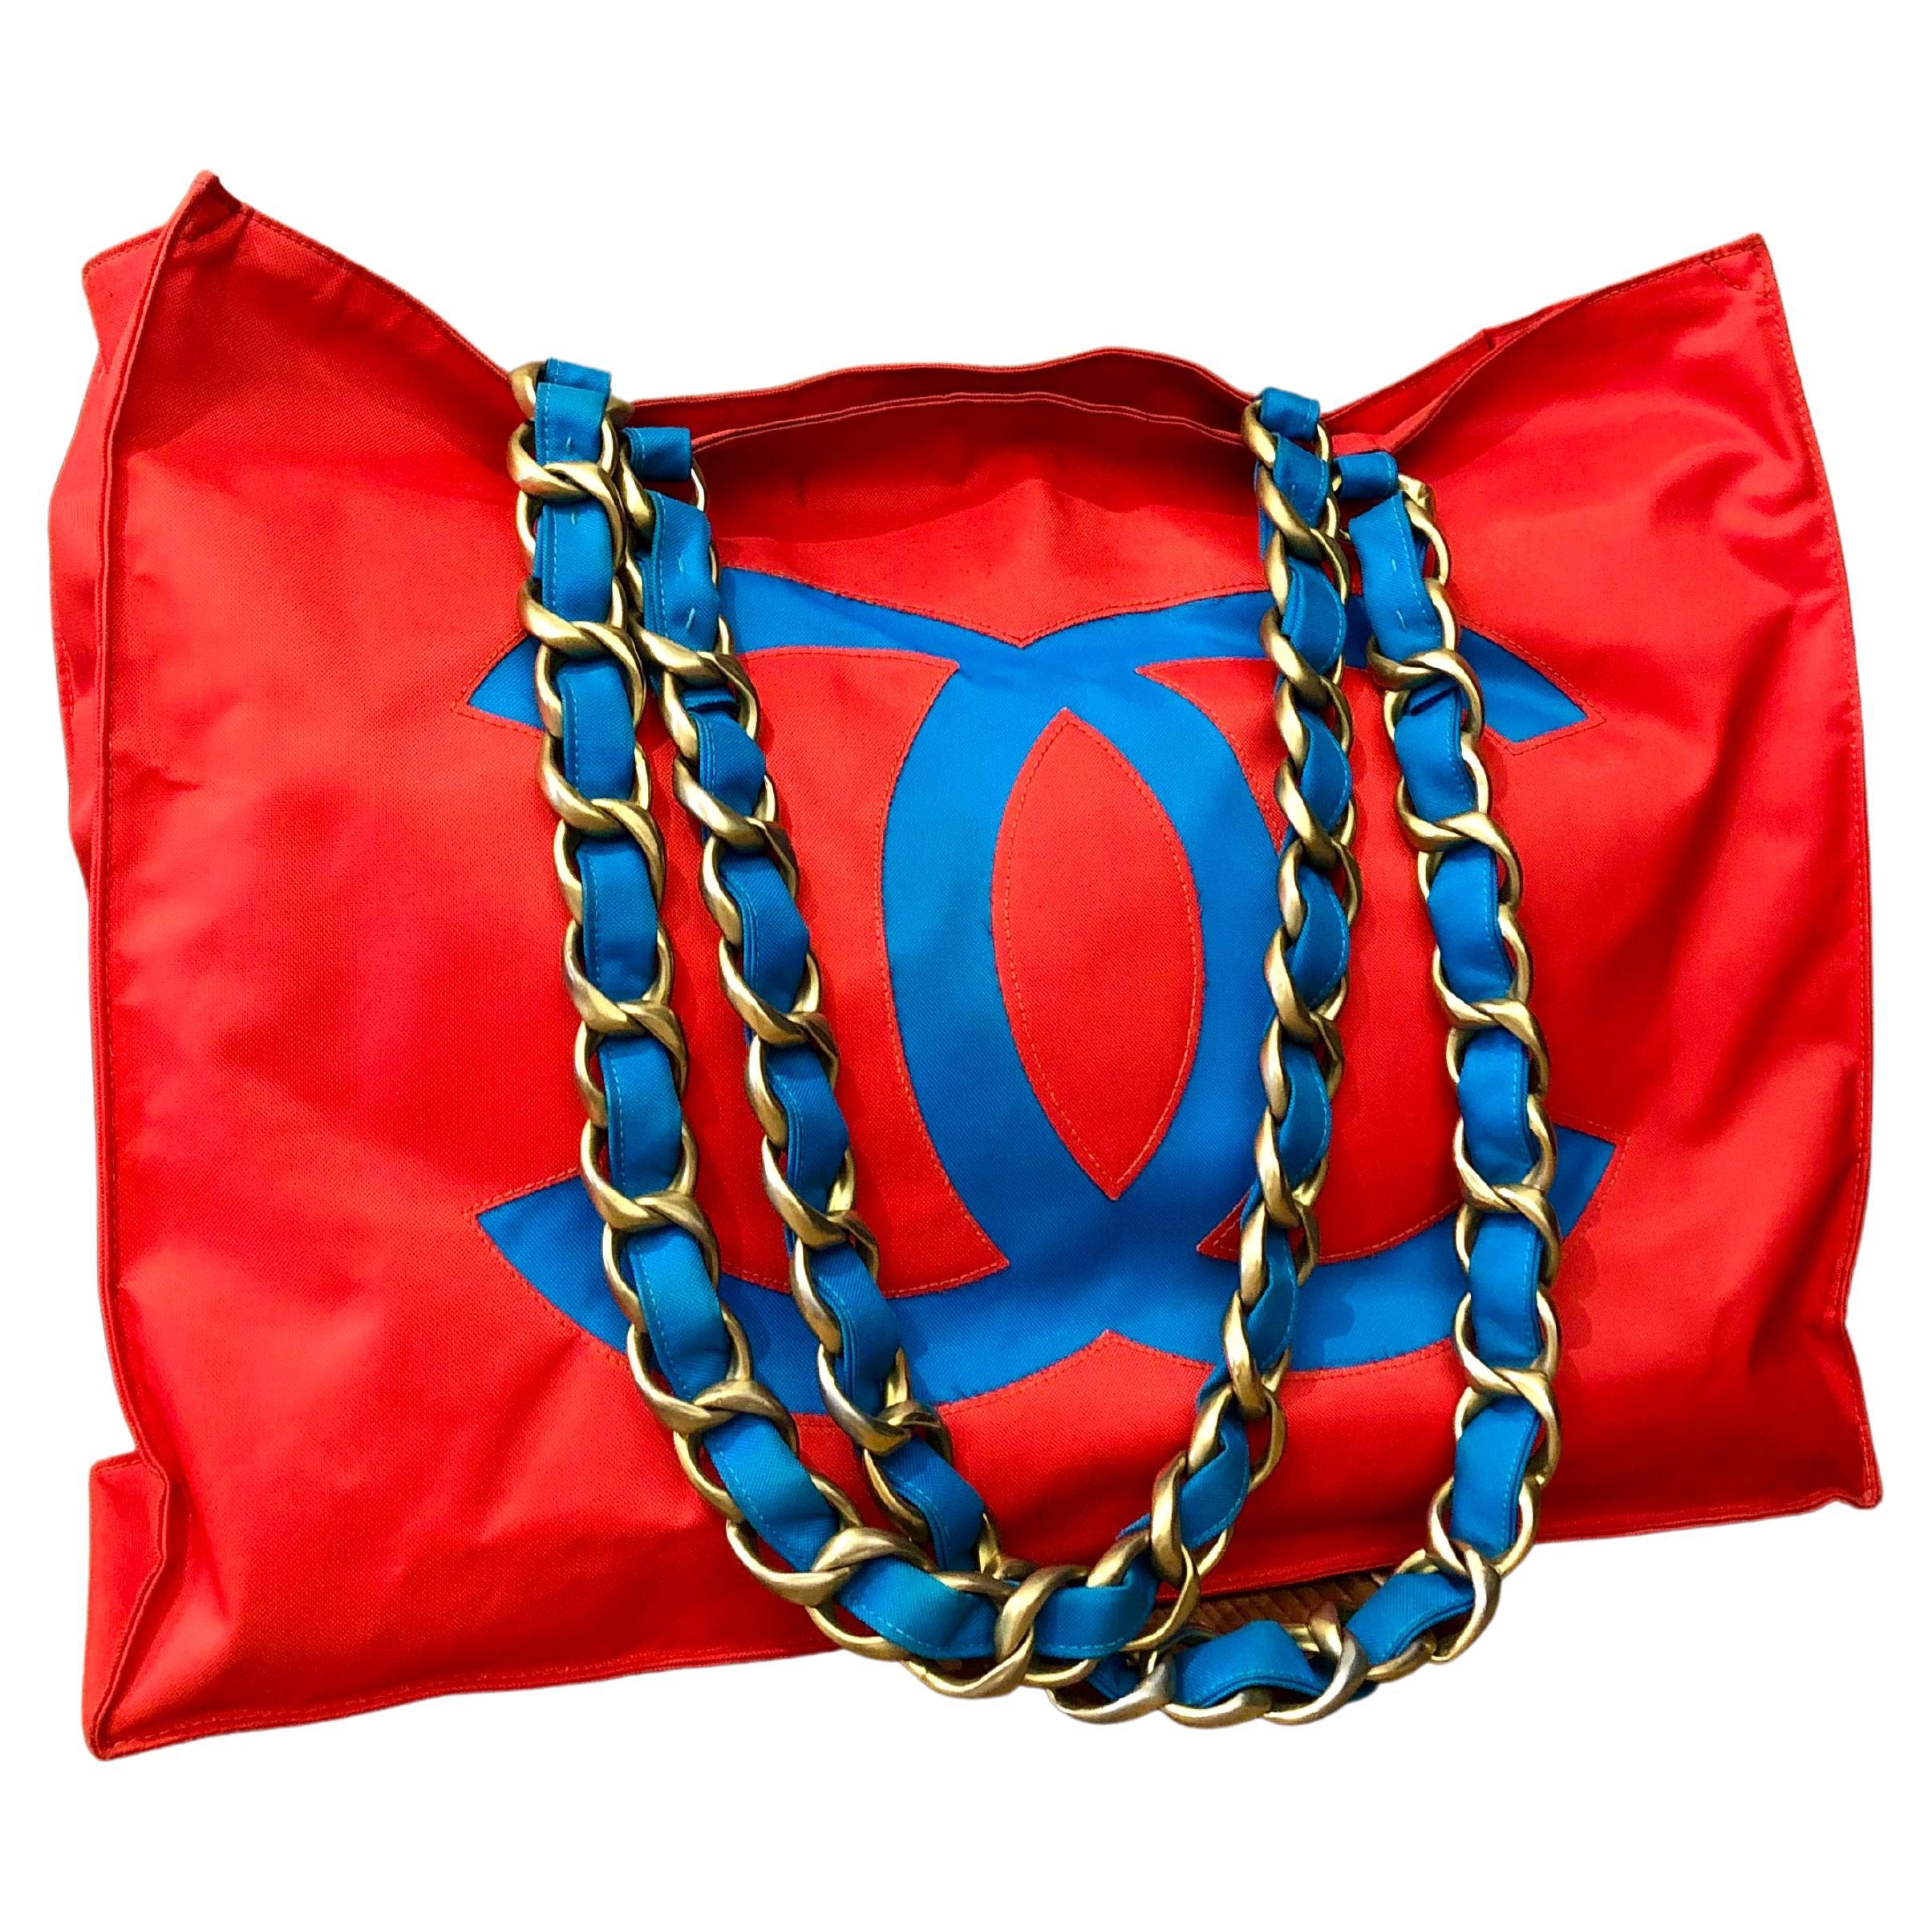 1990s Vintage CHANEL Jumbo Nylon Chain Tote Red Turquoise 